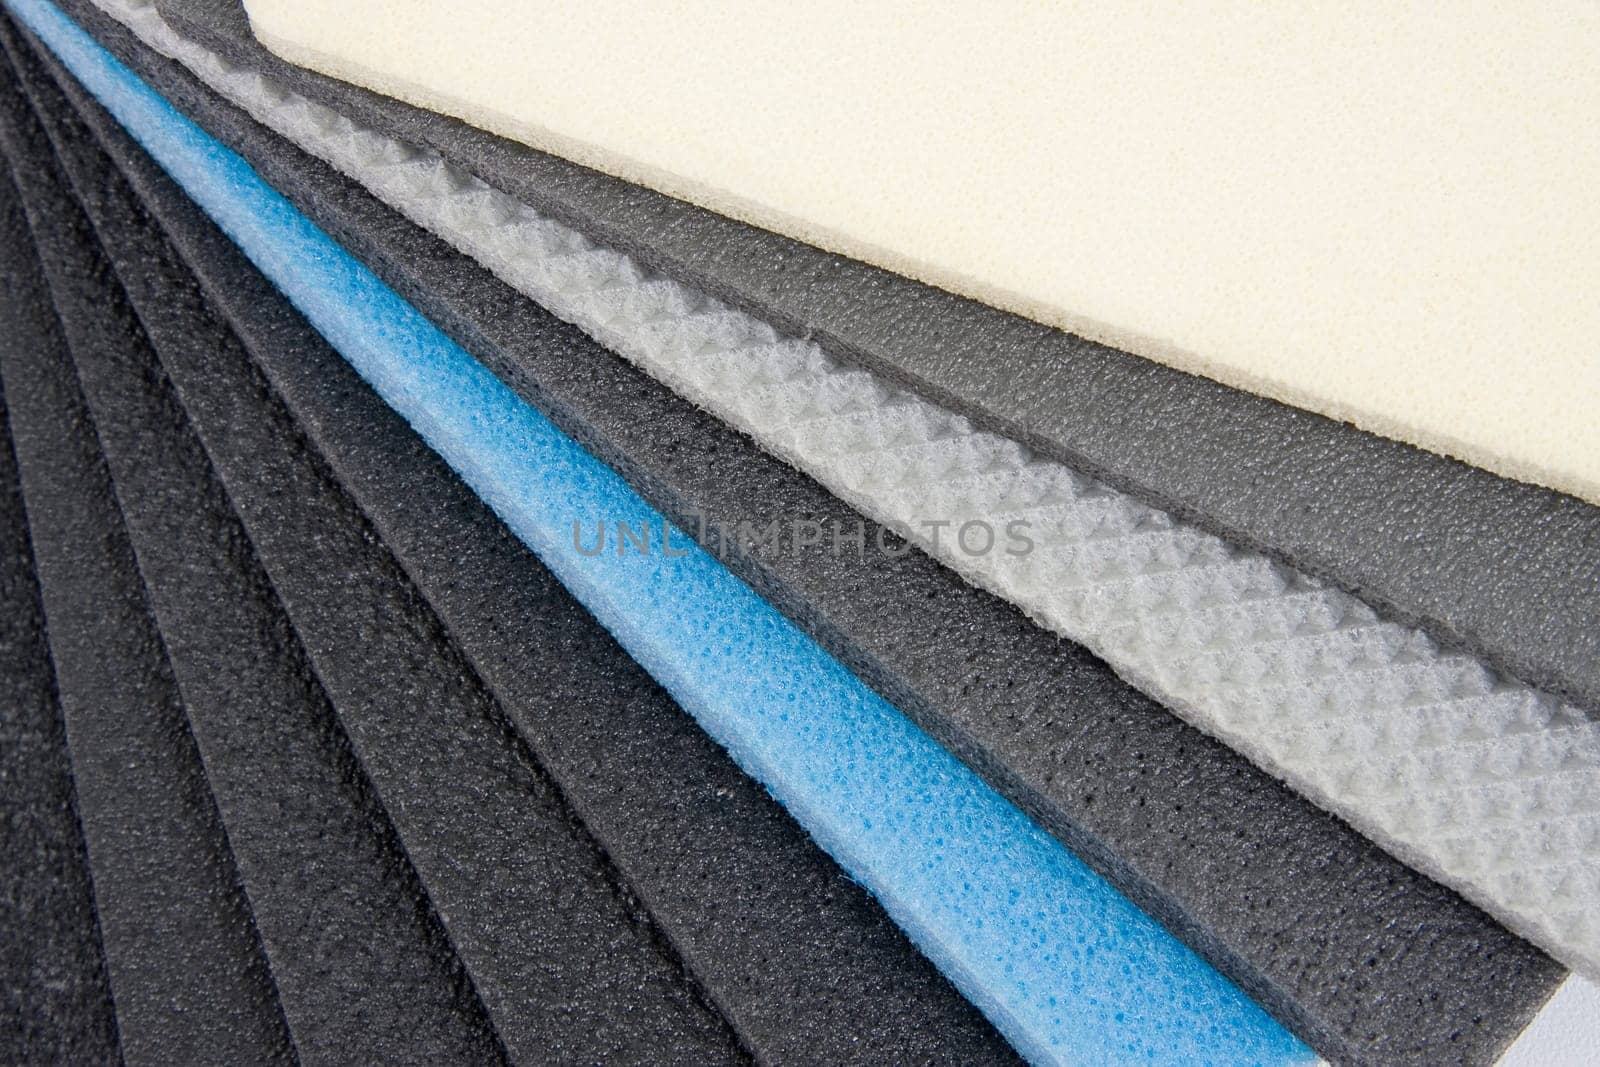 Roll of gray foam rubber sheet isolated in white. High quality photo